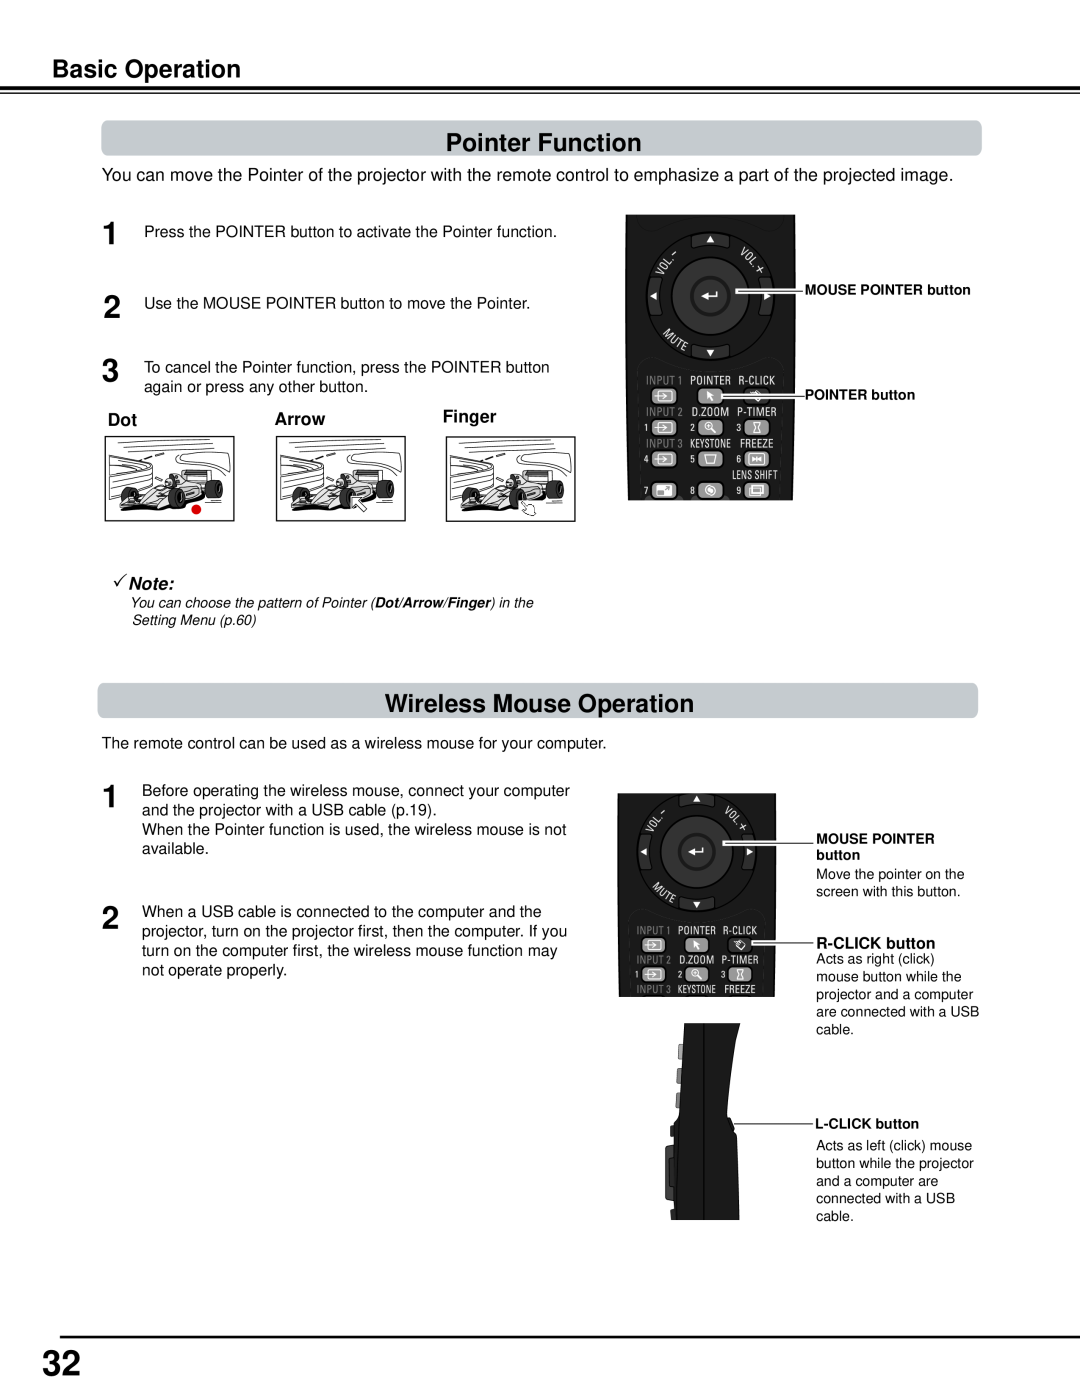 Sanyo WM5500L Basic Operation Pointer Function, Wireless Mouse Operation, Note, R-CLICK button, Setting Menu p.60 